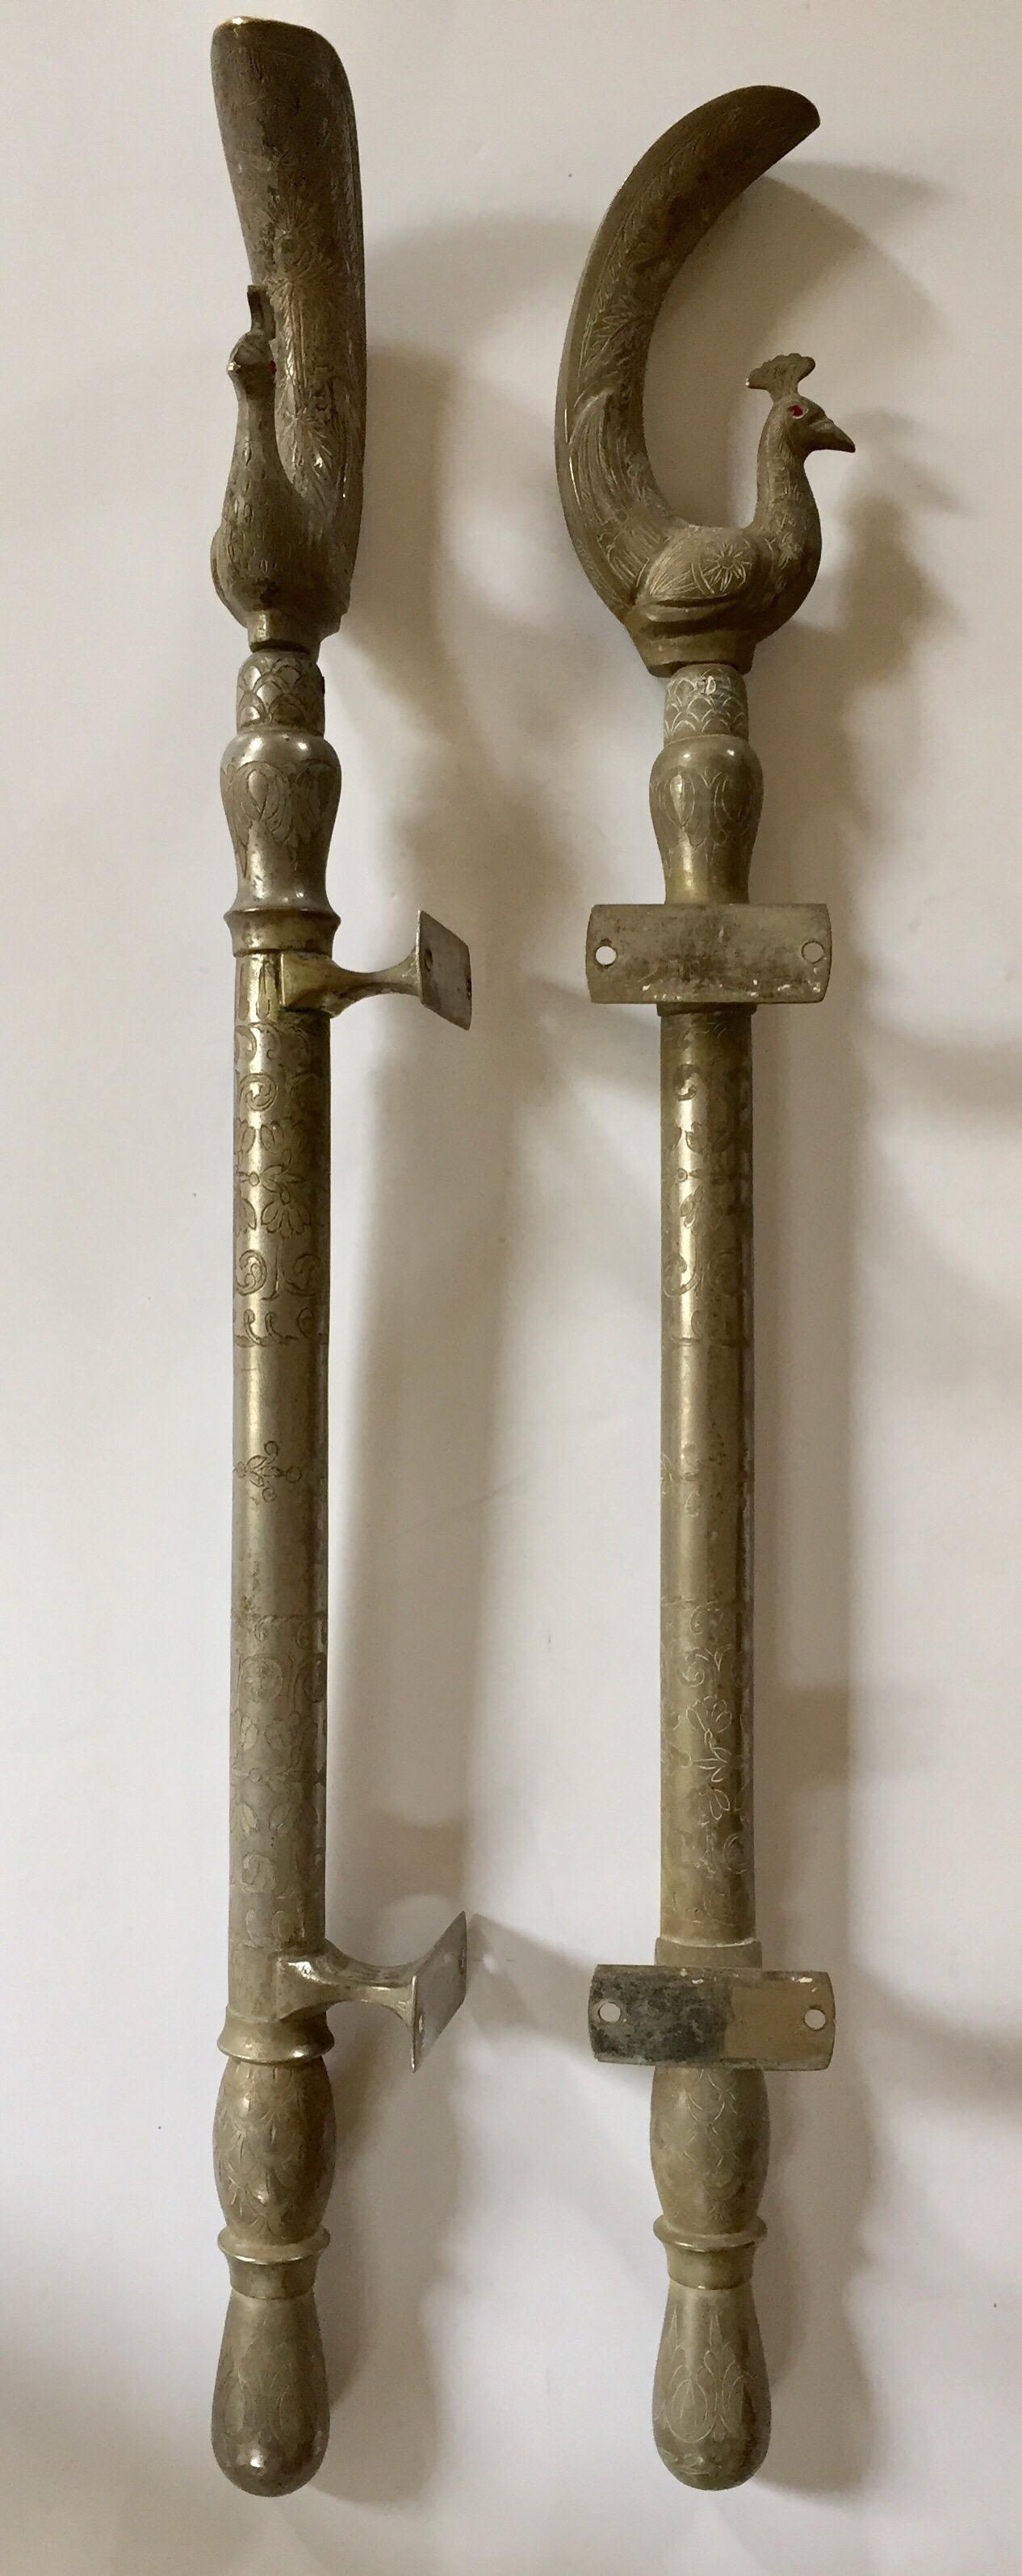 20th Century Large Pair of Mughal Indian Peacock Shaped Brass Silvered Door Handles